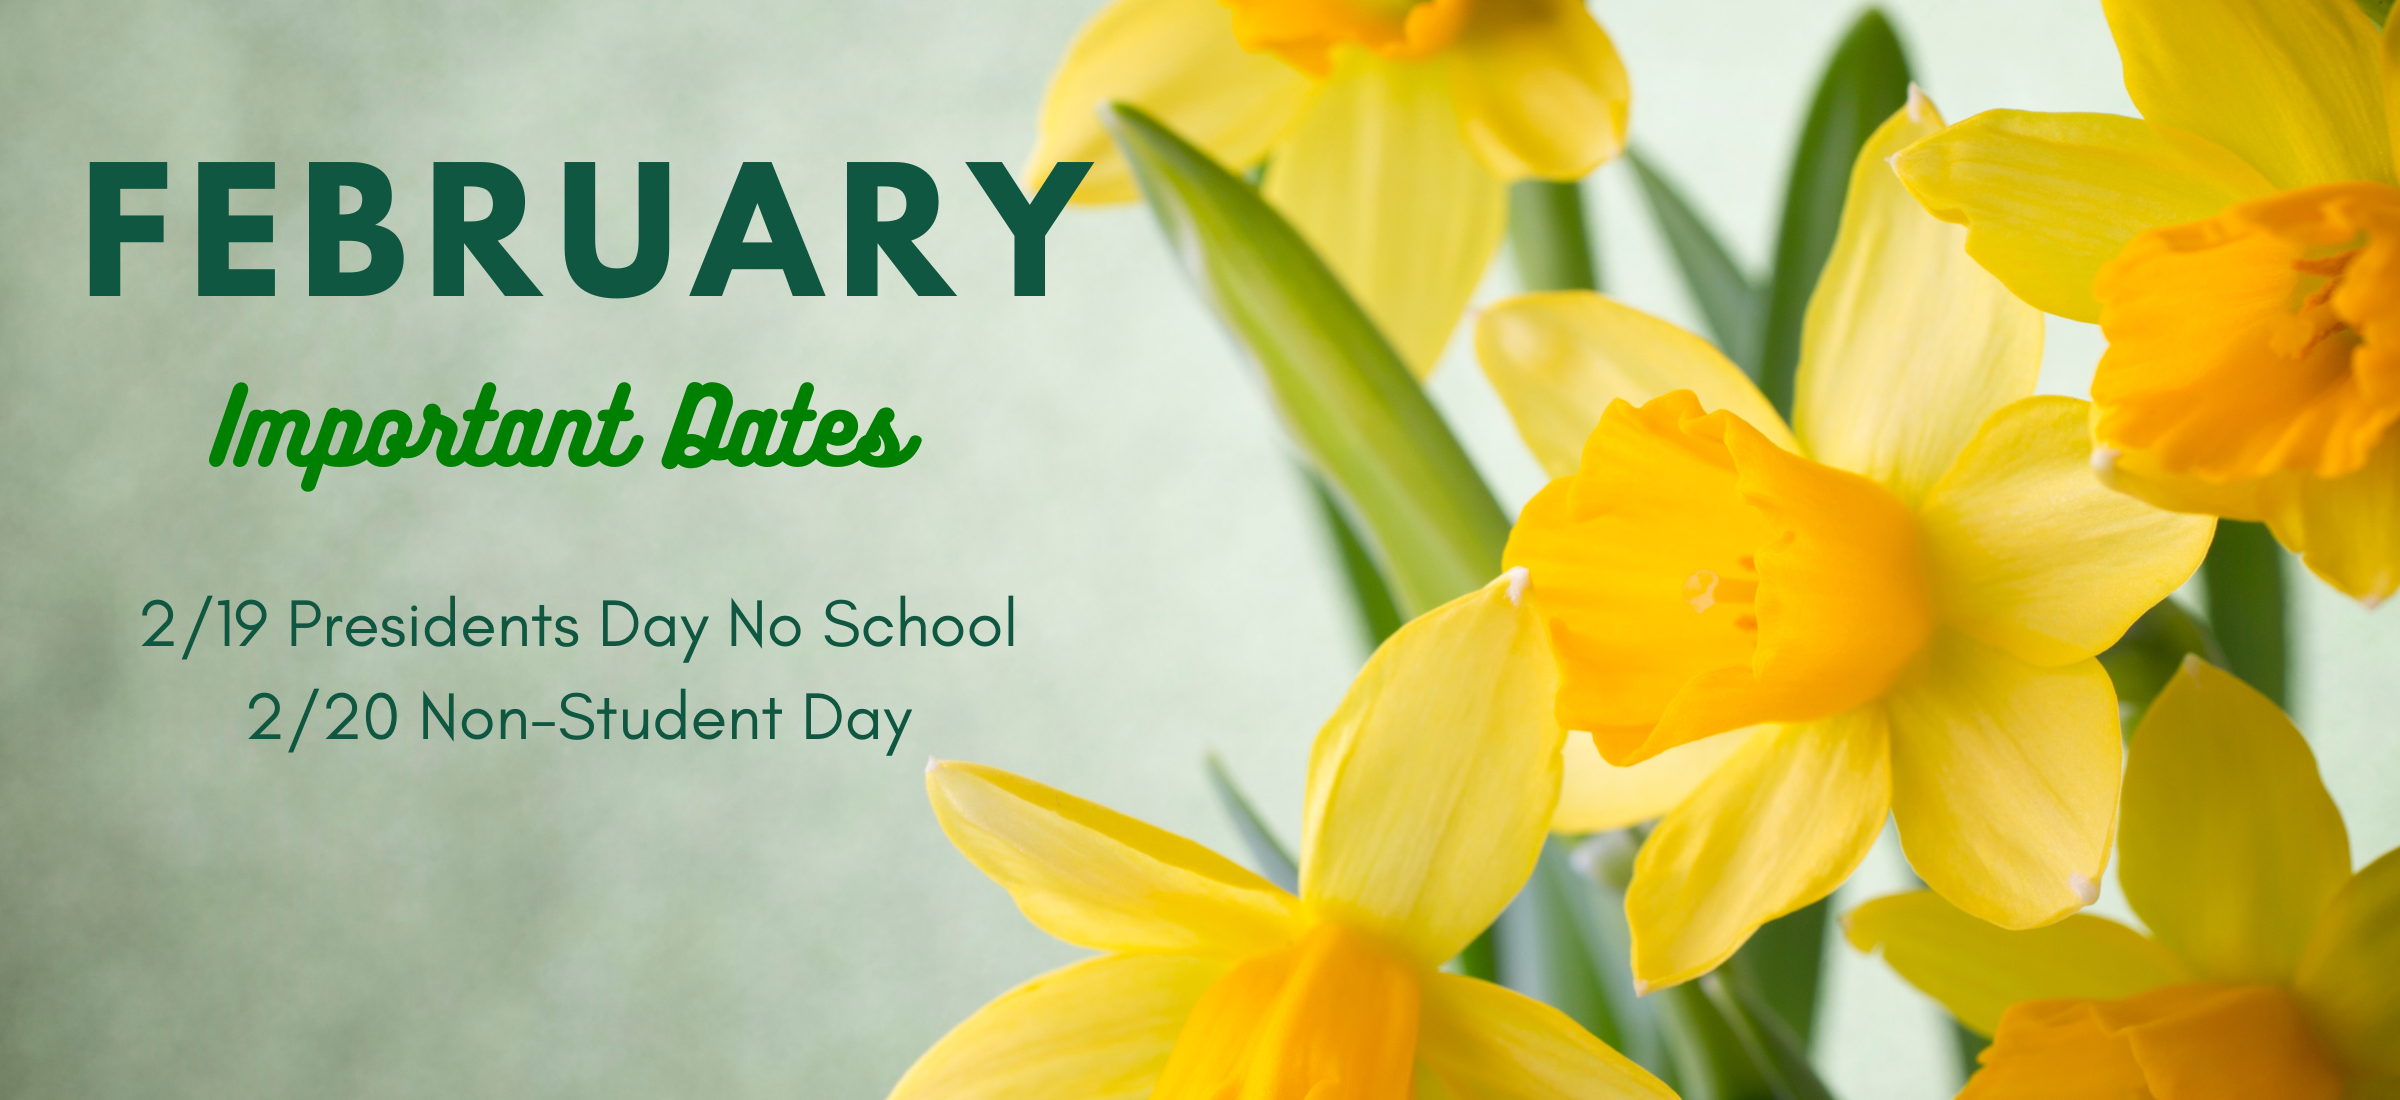 February important dates are 2/19 no school for Presidents Day and 2/20 non-student day.